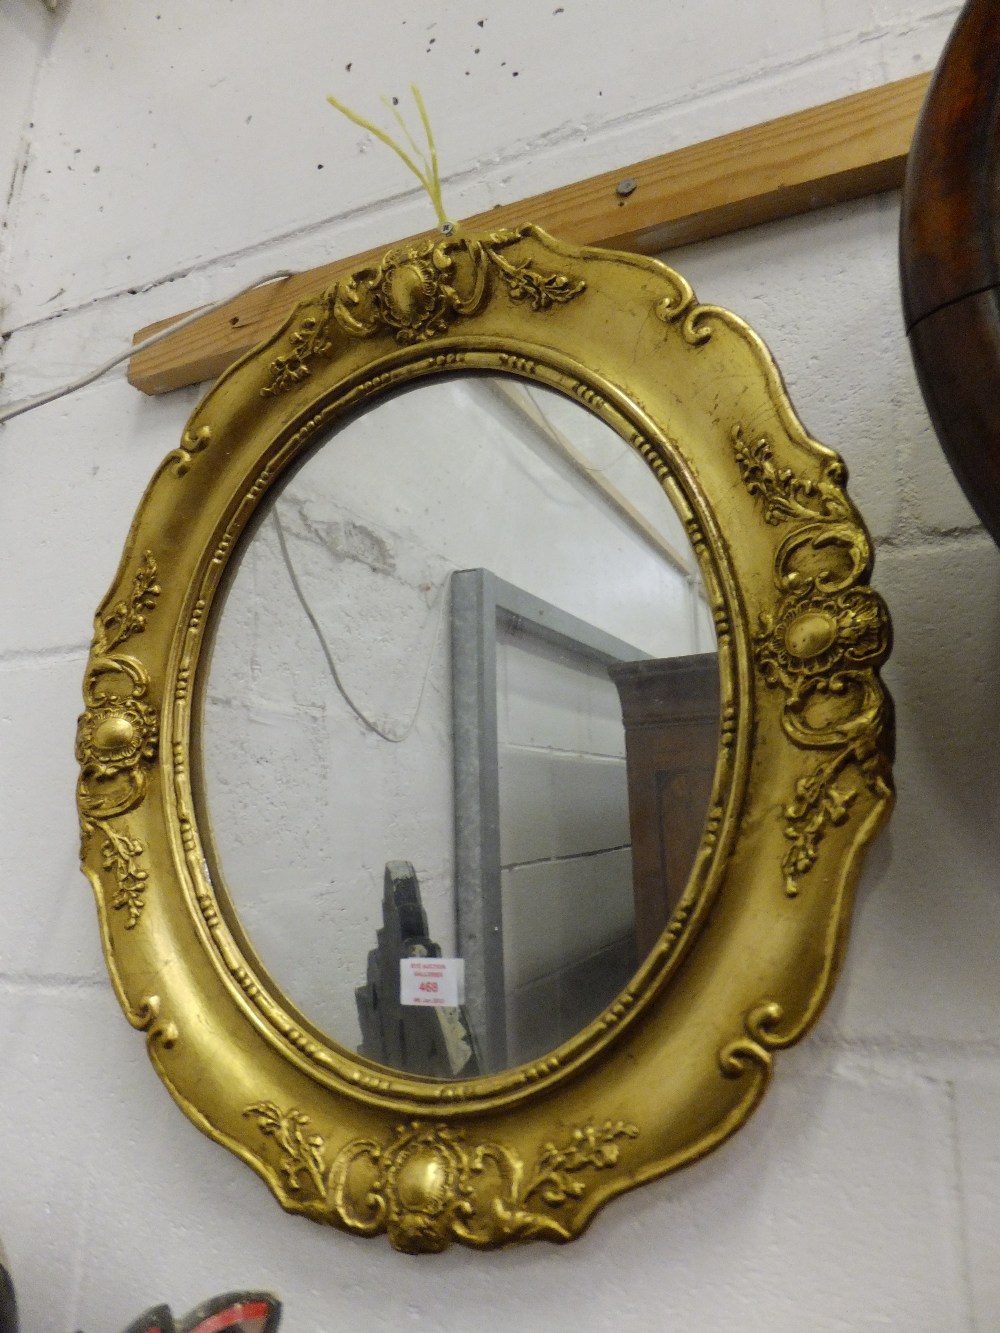 A early 20th century gilt wood framed mirror with floral and cartouche decoration 52 x 45cm. This is